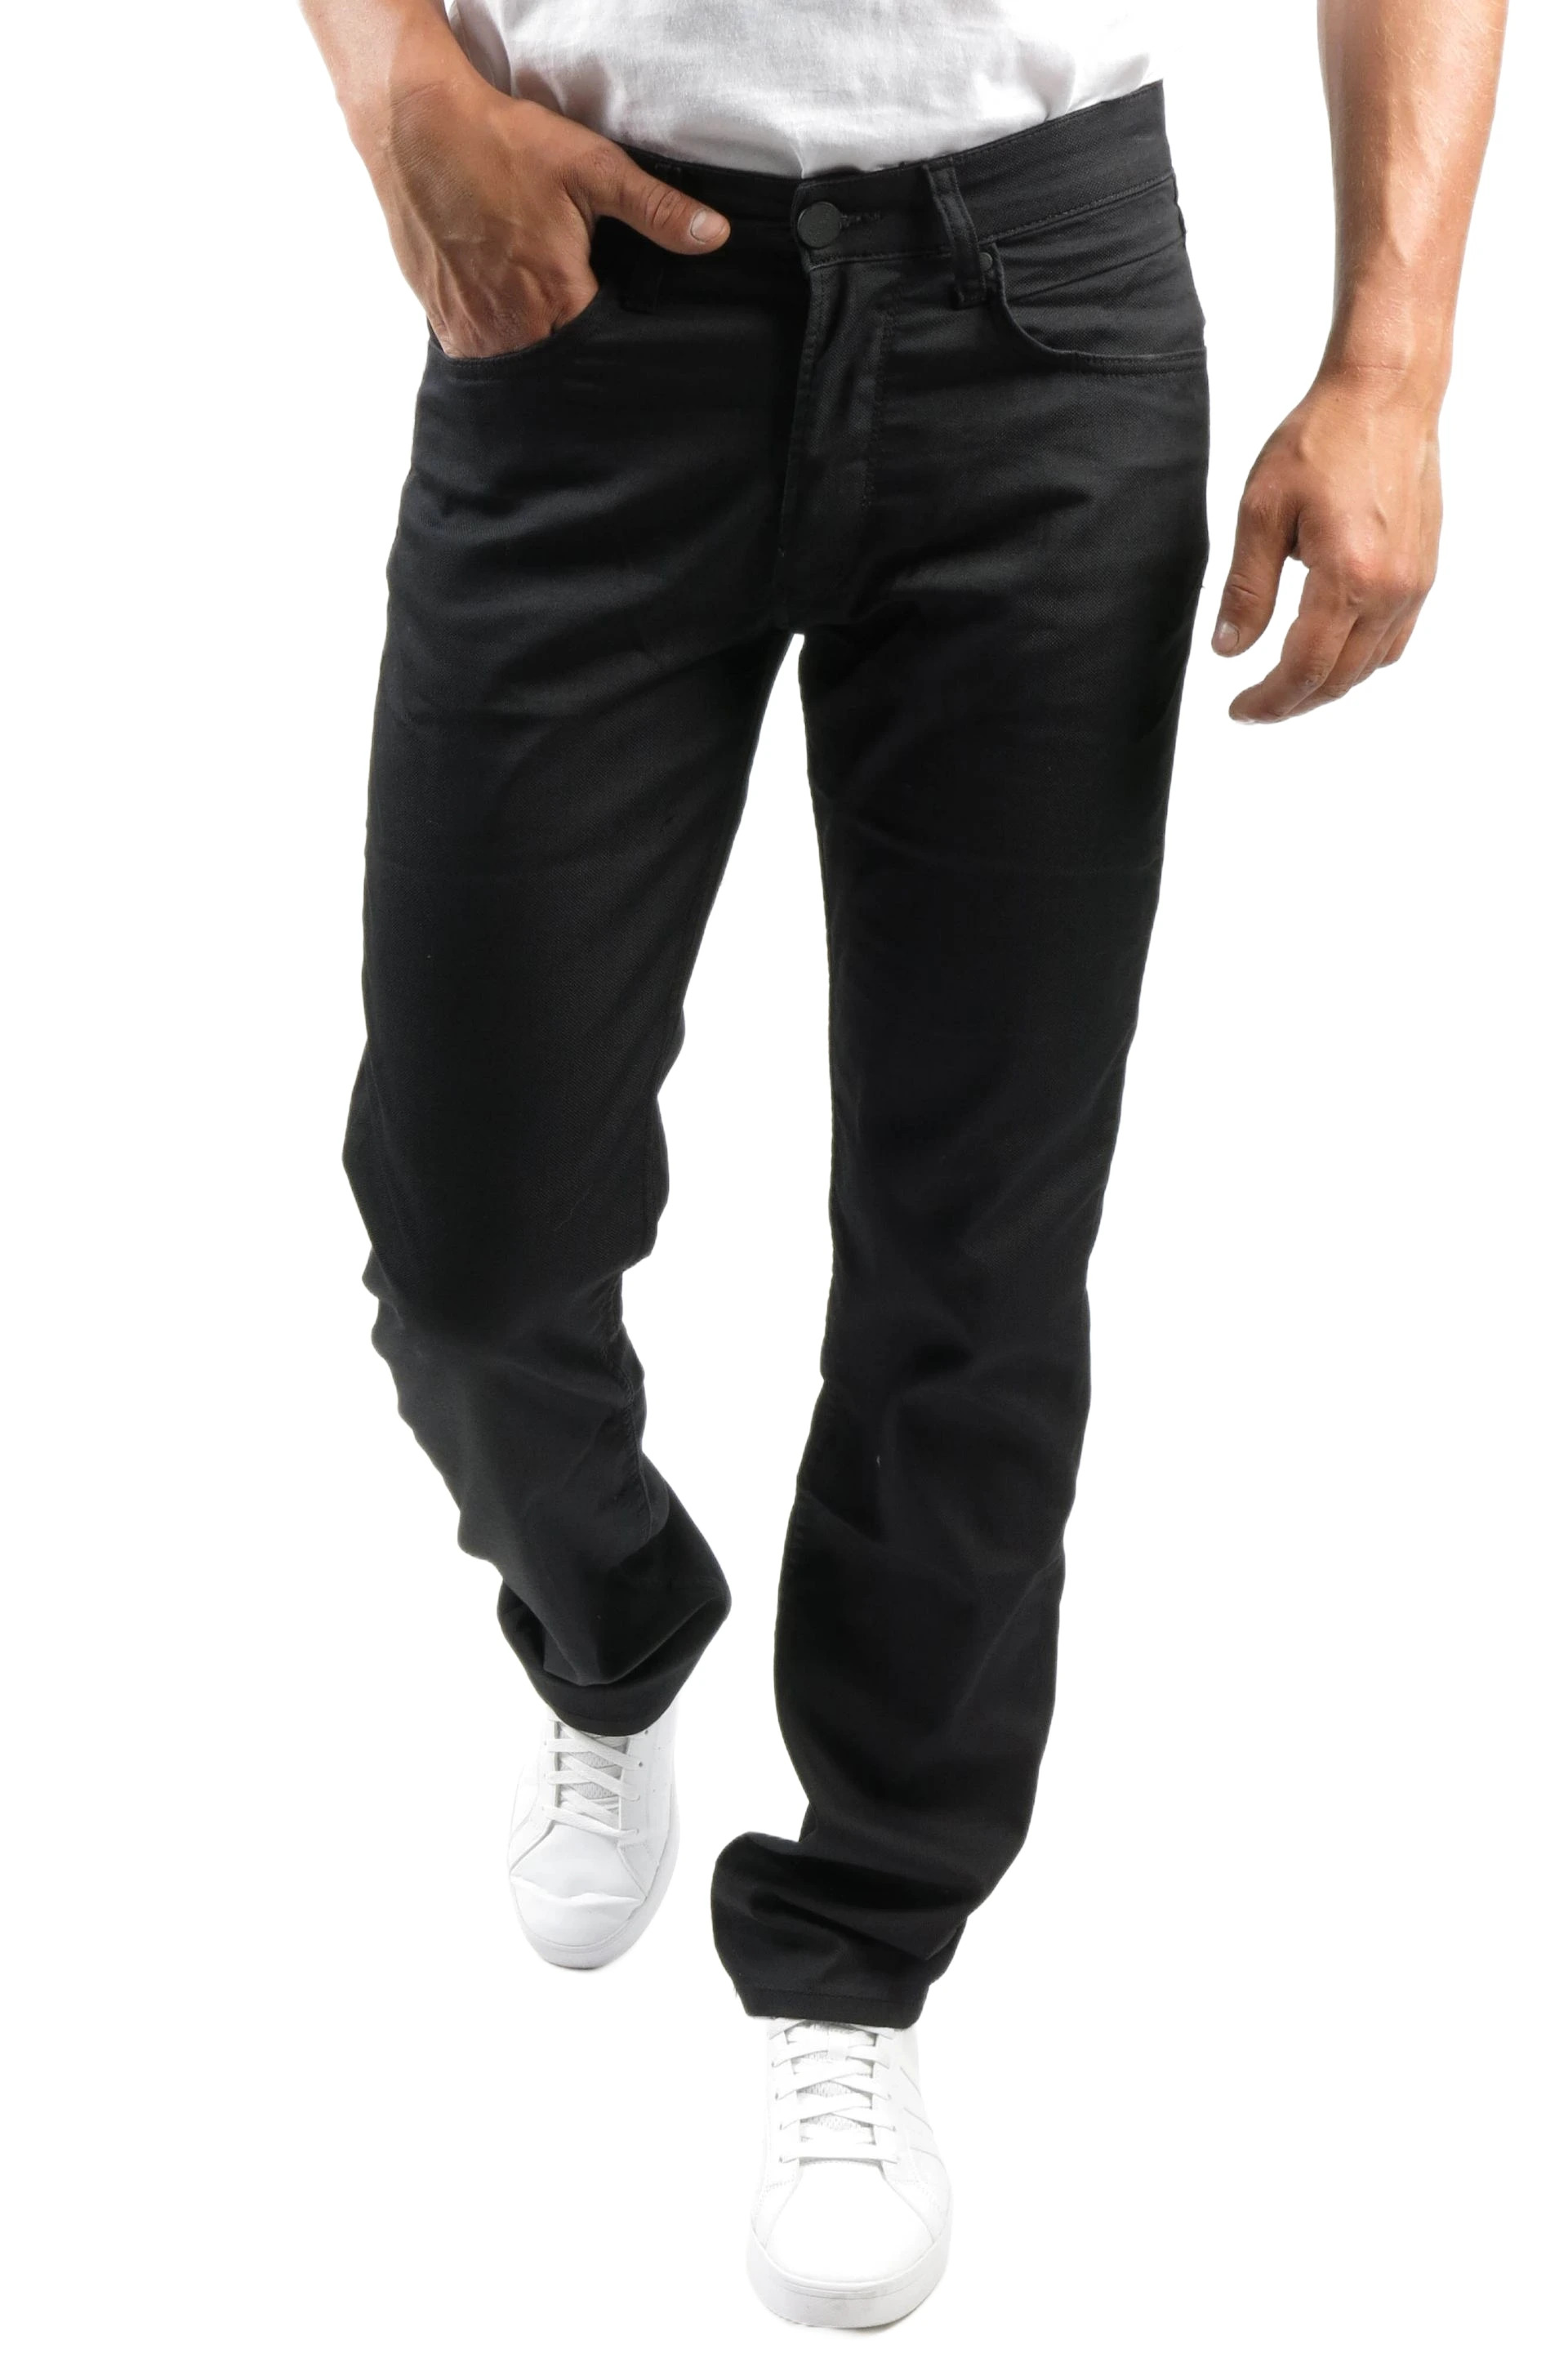 Chino pants BLK JEANS 8279-283-301-202